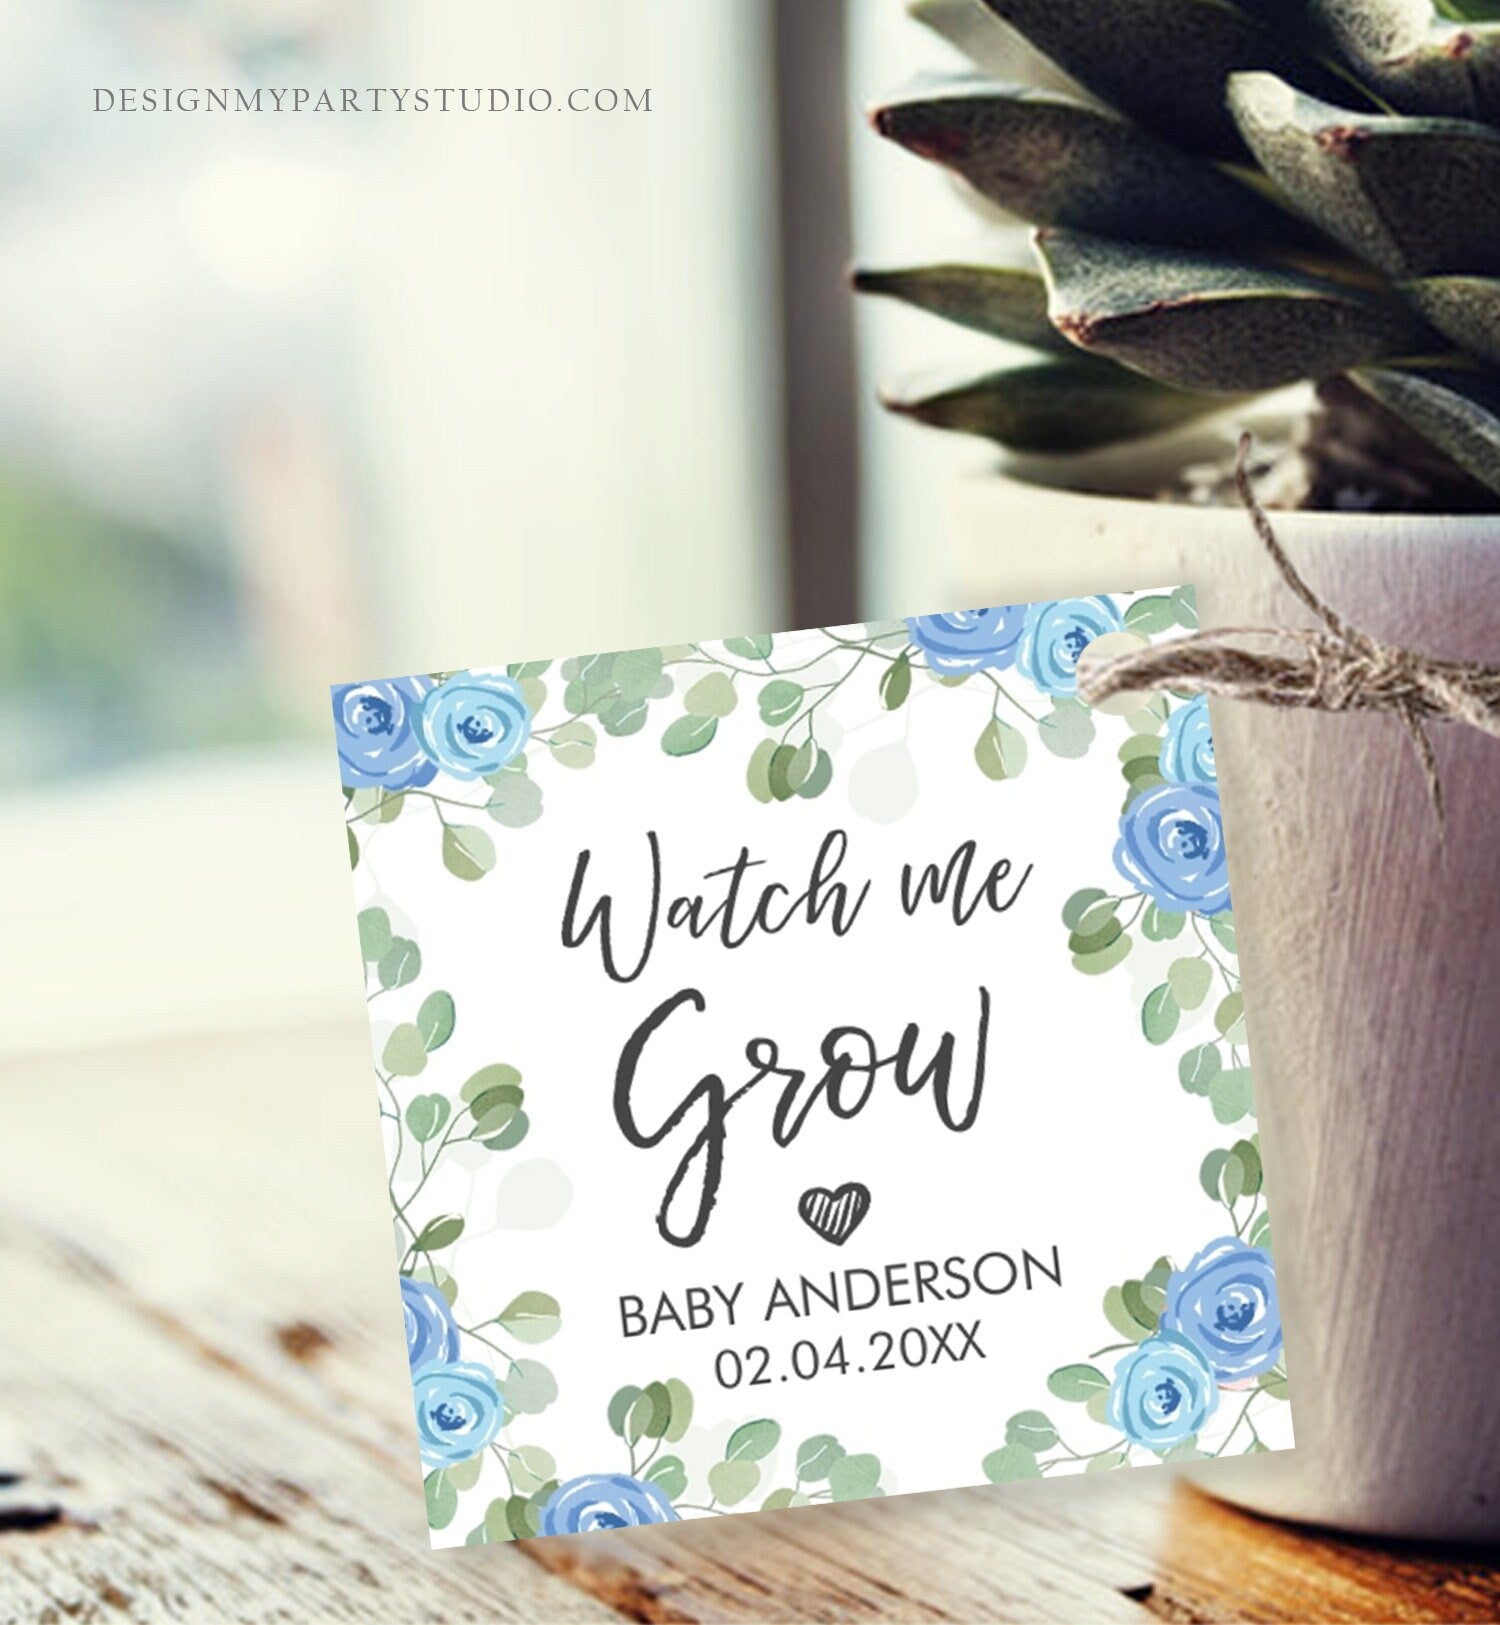 Editable Watch Me Grow Tags Baby Shower Favor Tags Plant Tags Cactus Succulent Thank You Tag Download Corjl Template Printable 0029